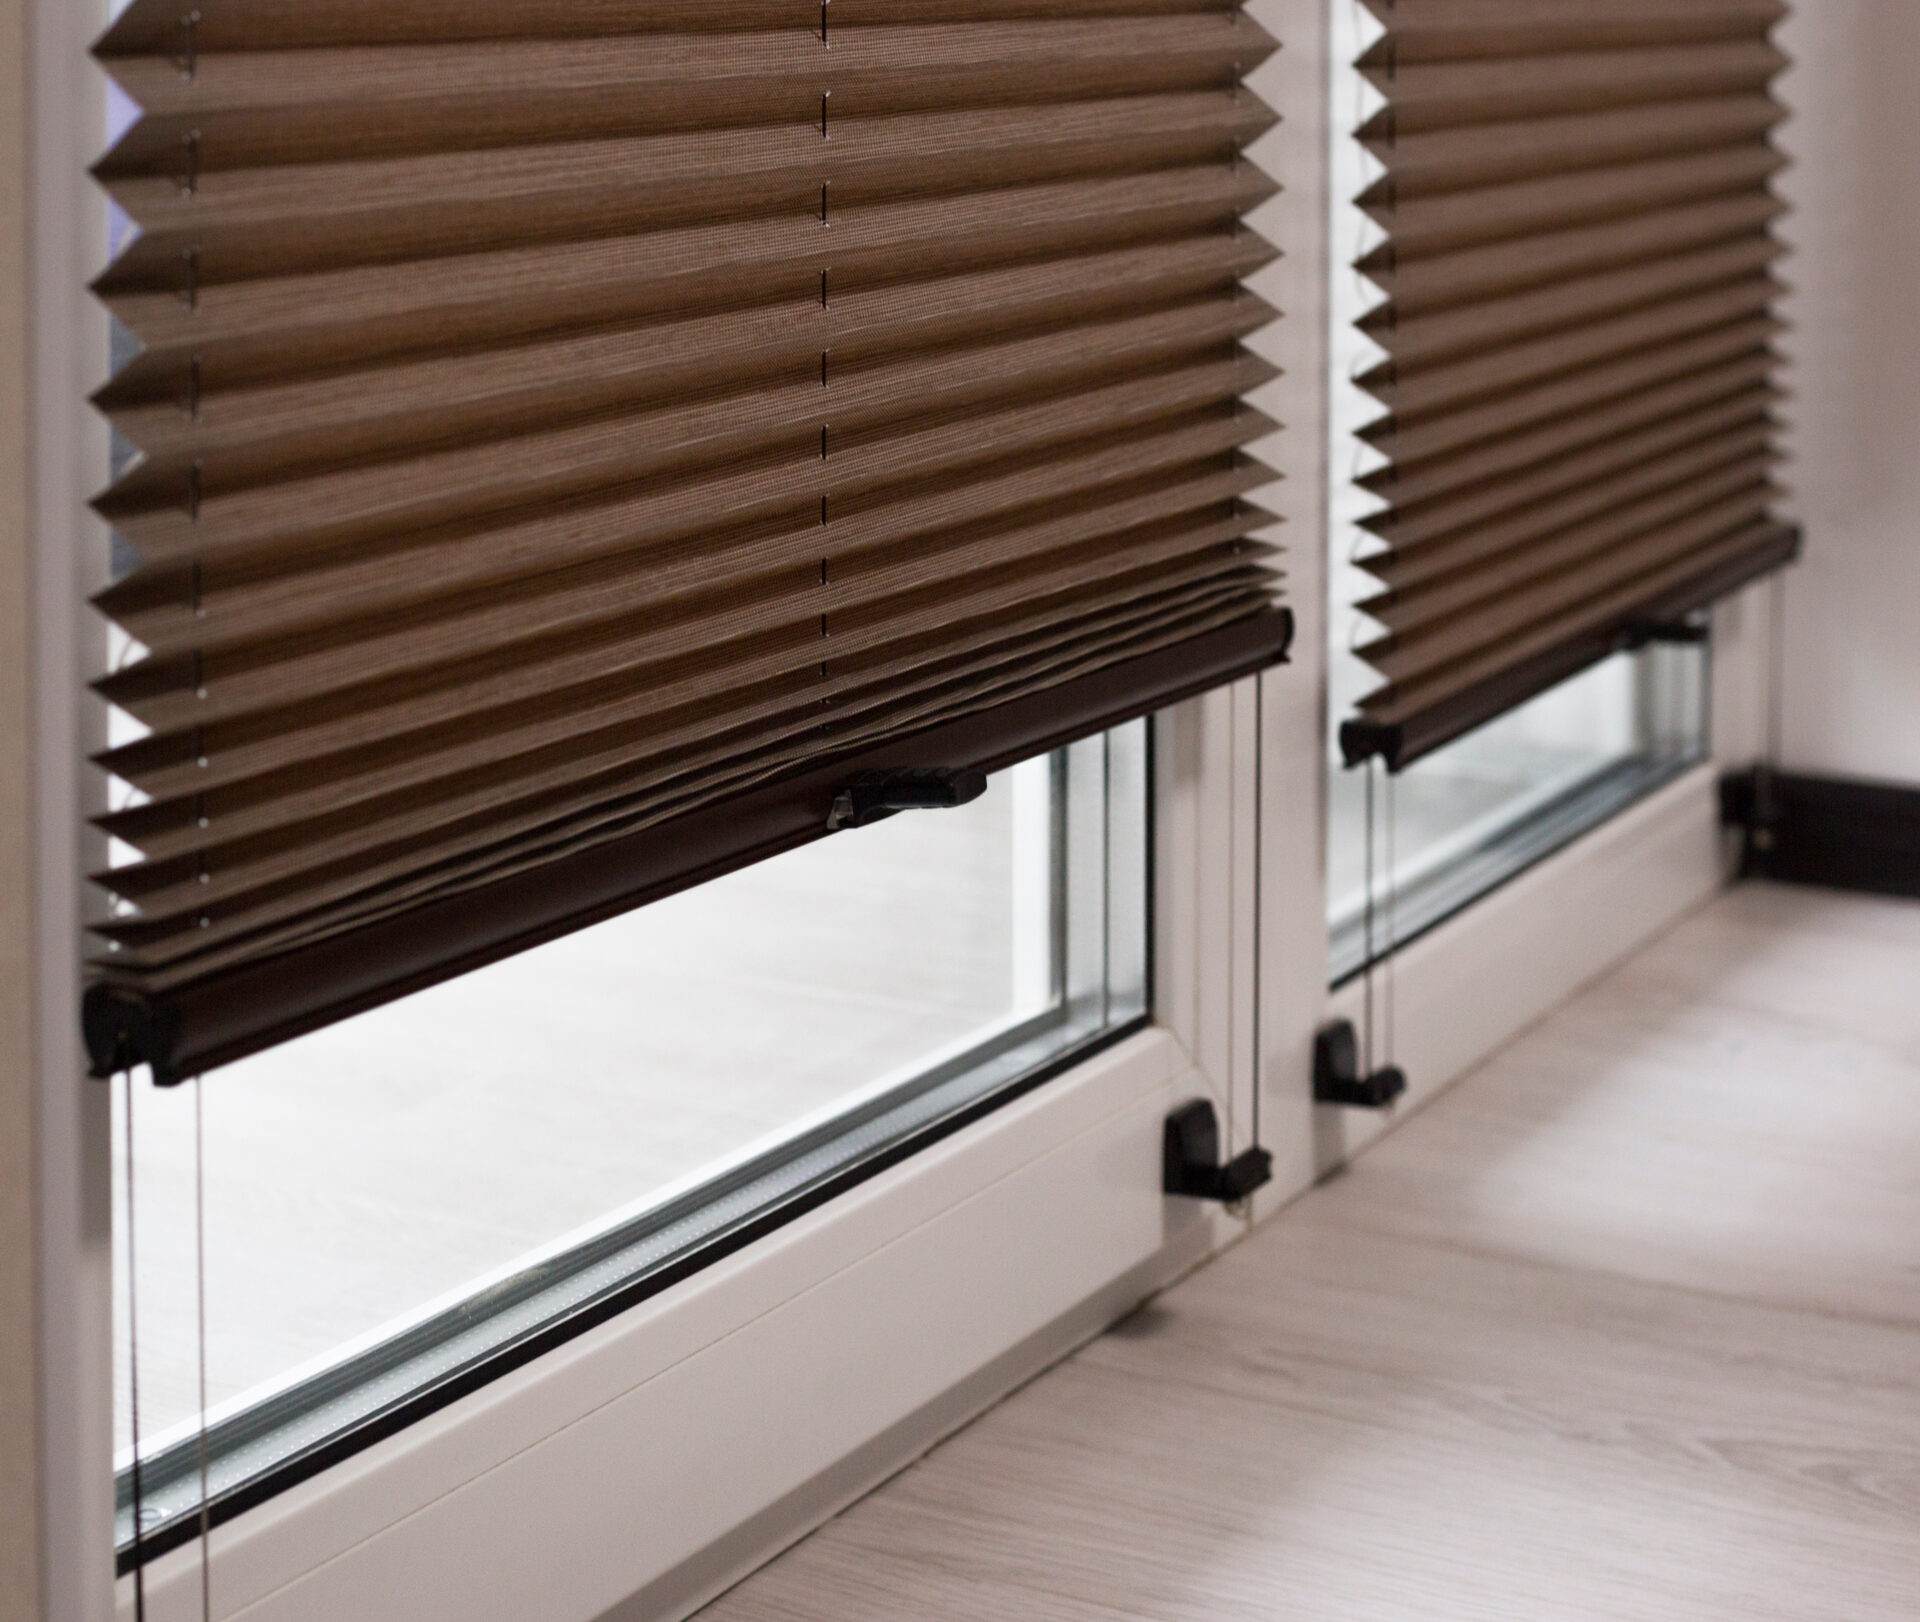 Pleated Blinds in modern living room interior. Wholesale Blind Factory